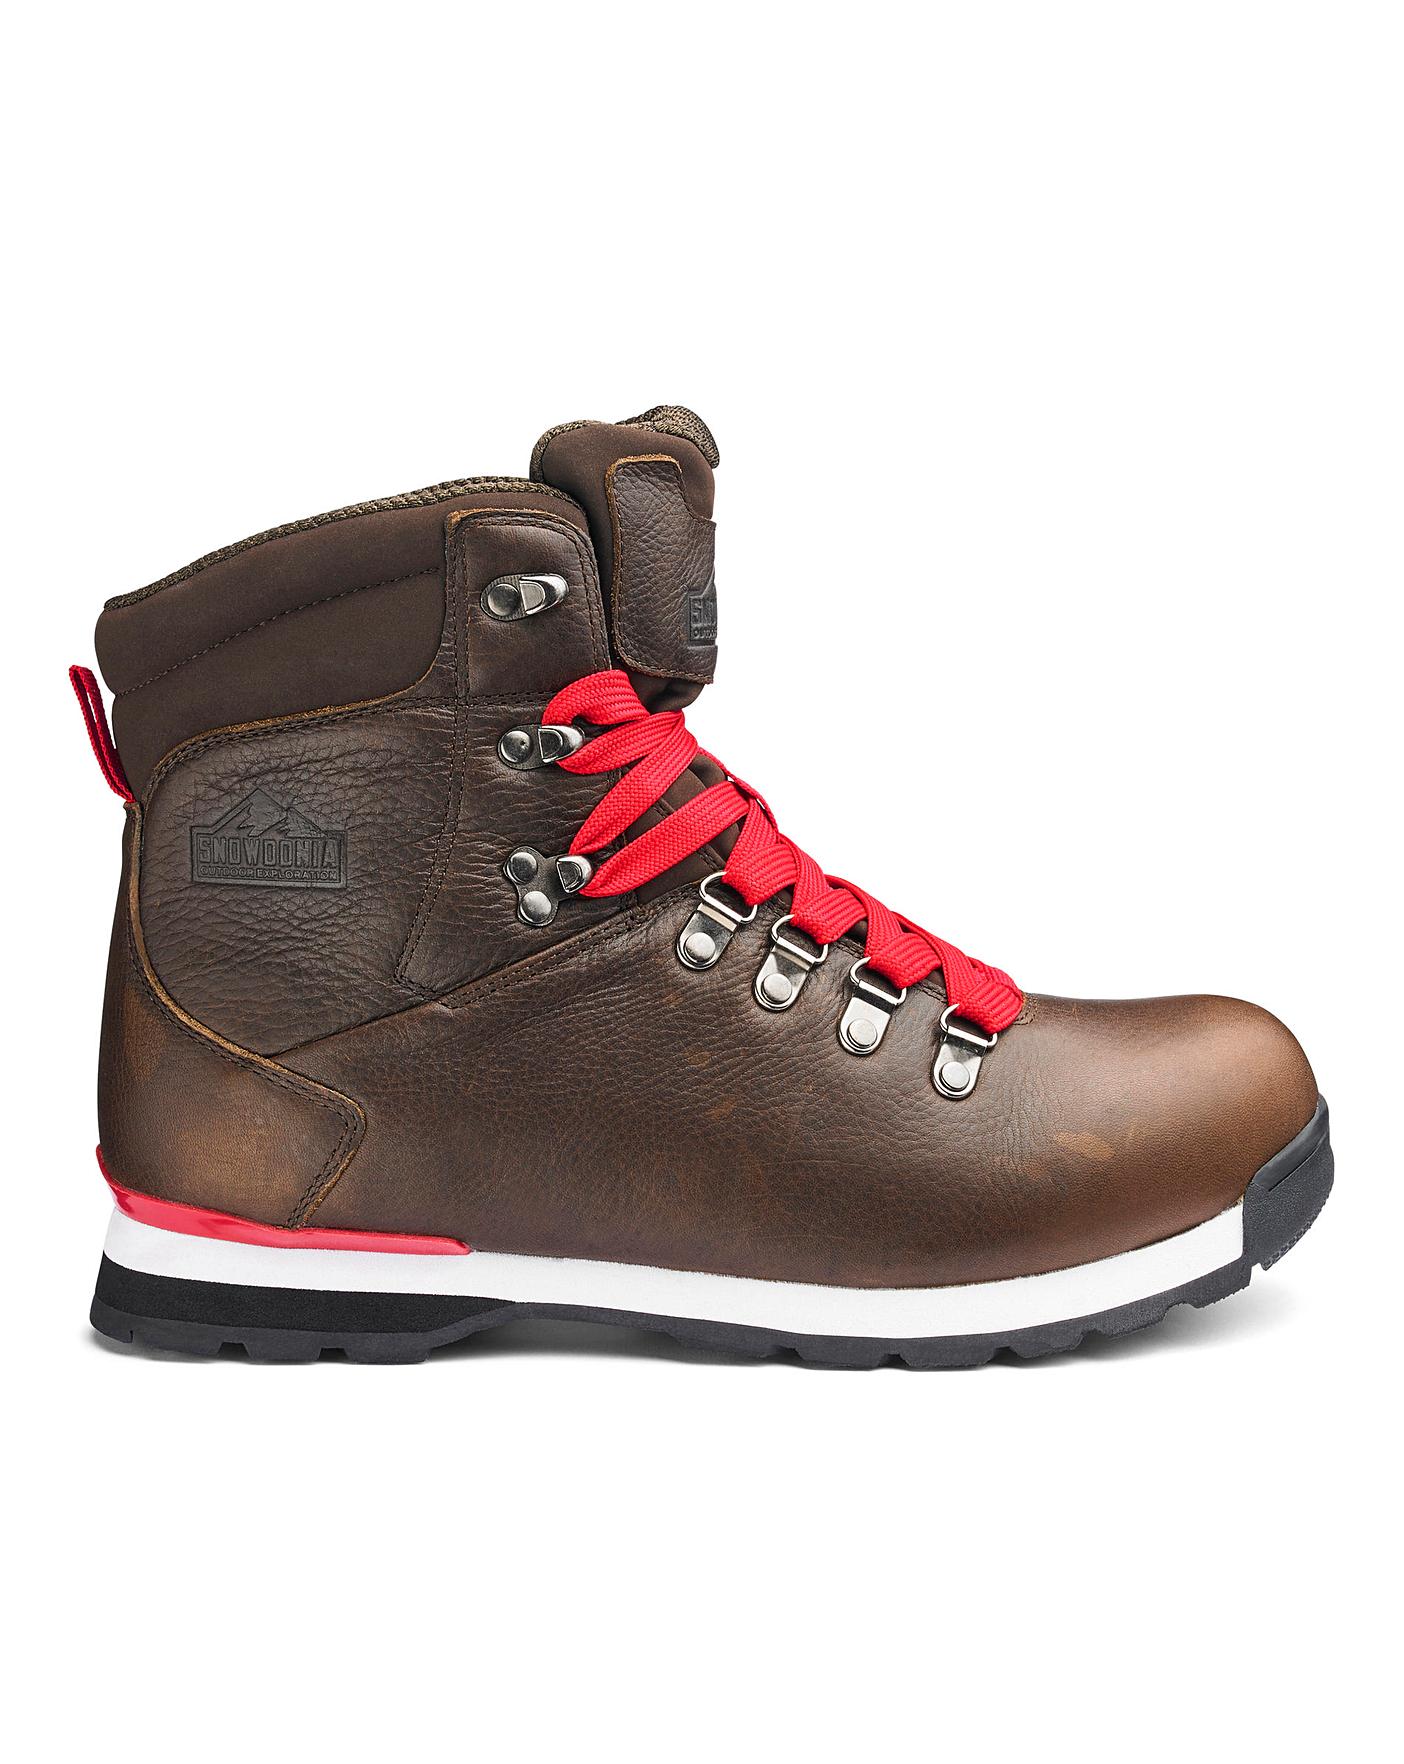 Snowdonia Mens Leather Walking Boots 